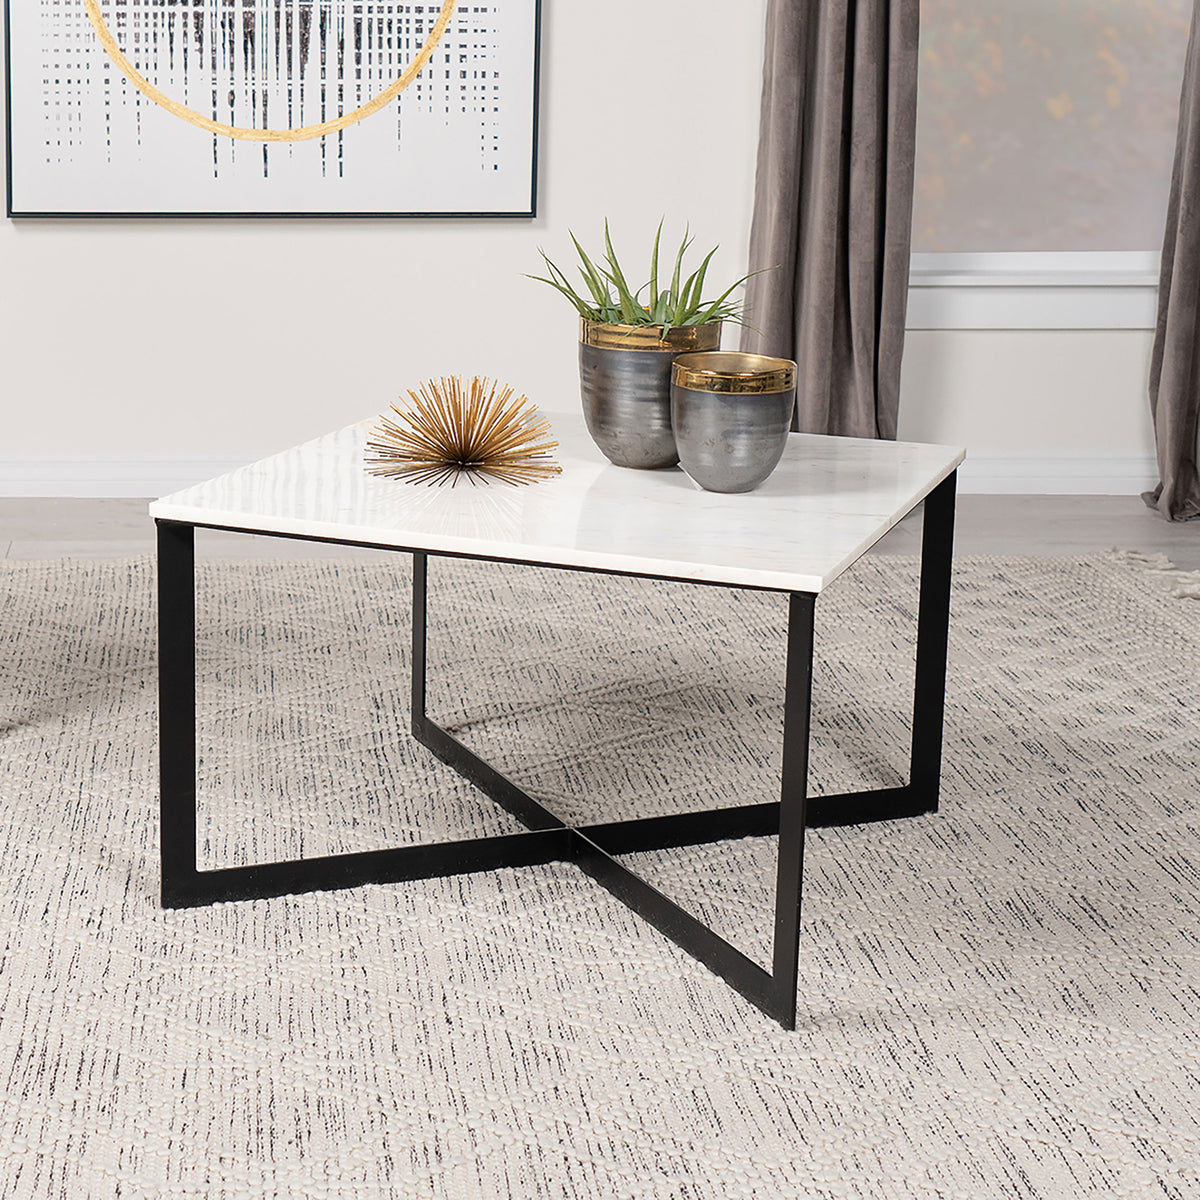 Tobin Square Marble Top Coffee Table White and Black  Half Price Furniture